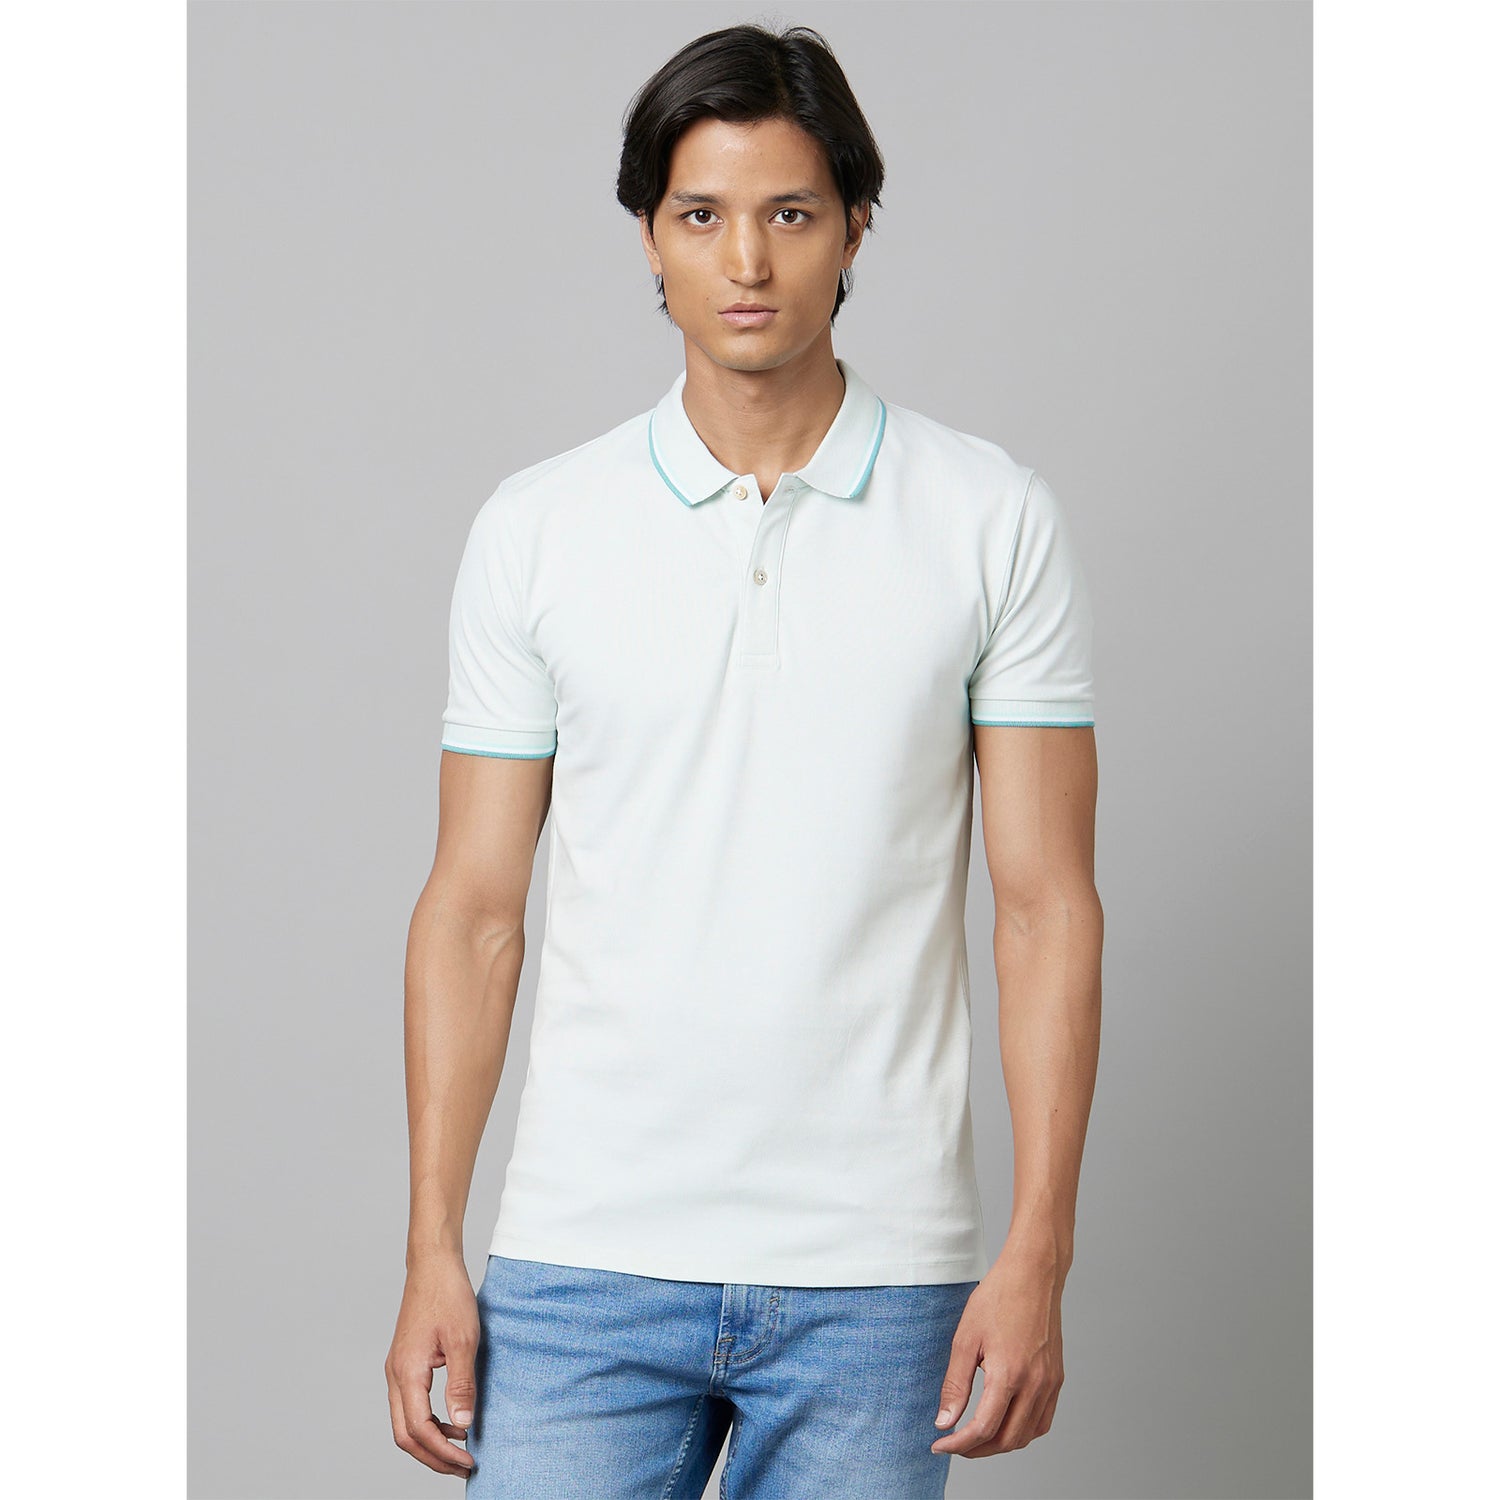 White Solid Short Sleeves Polo T-Shirt